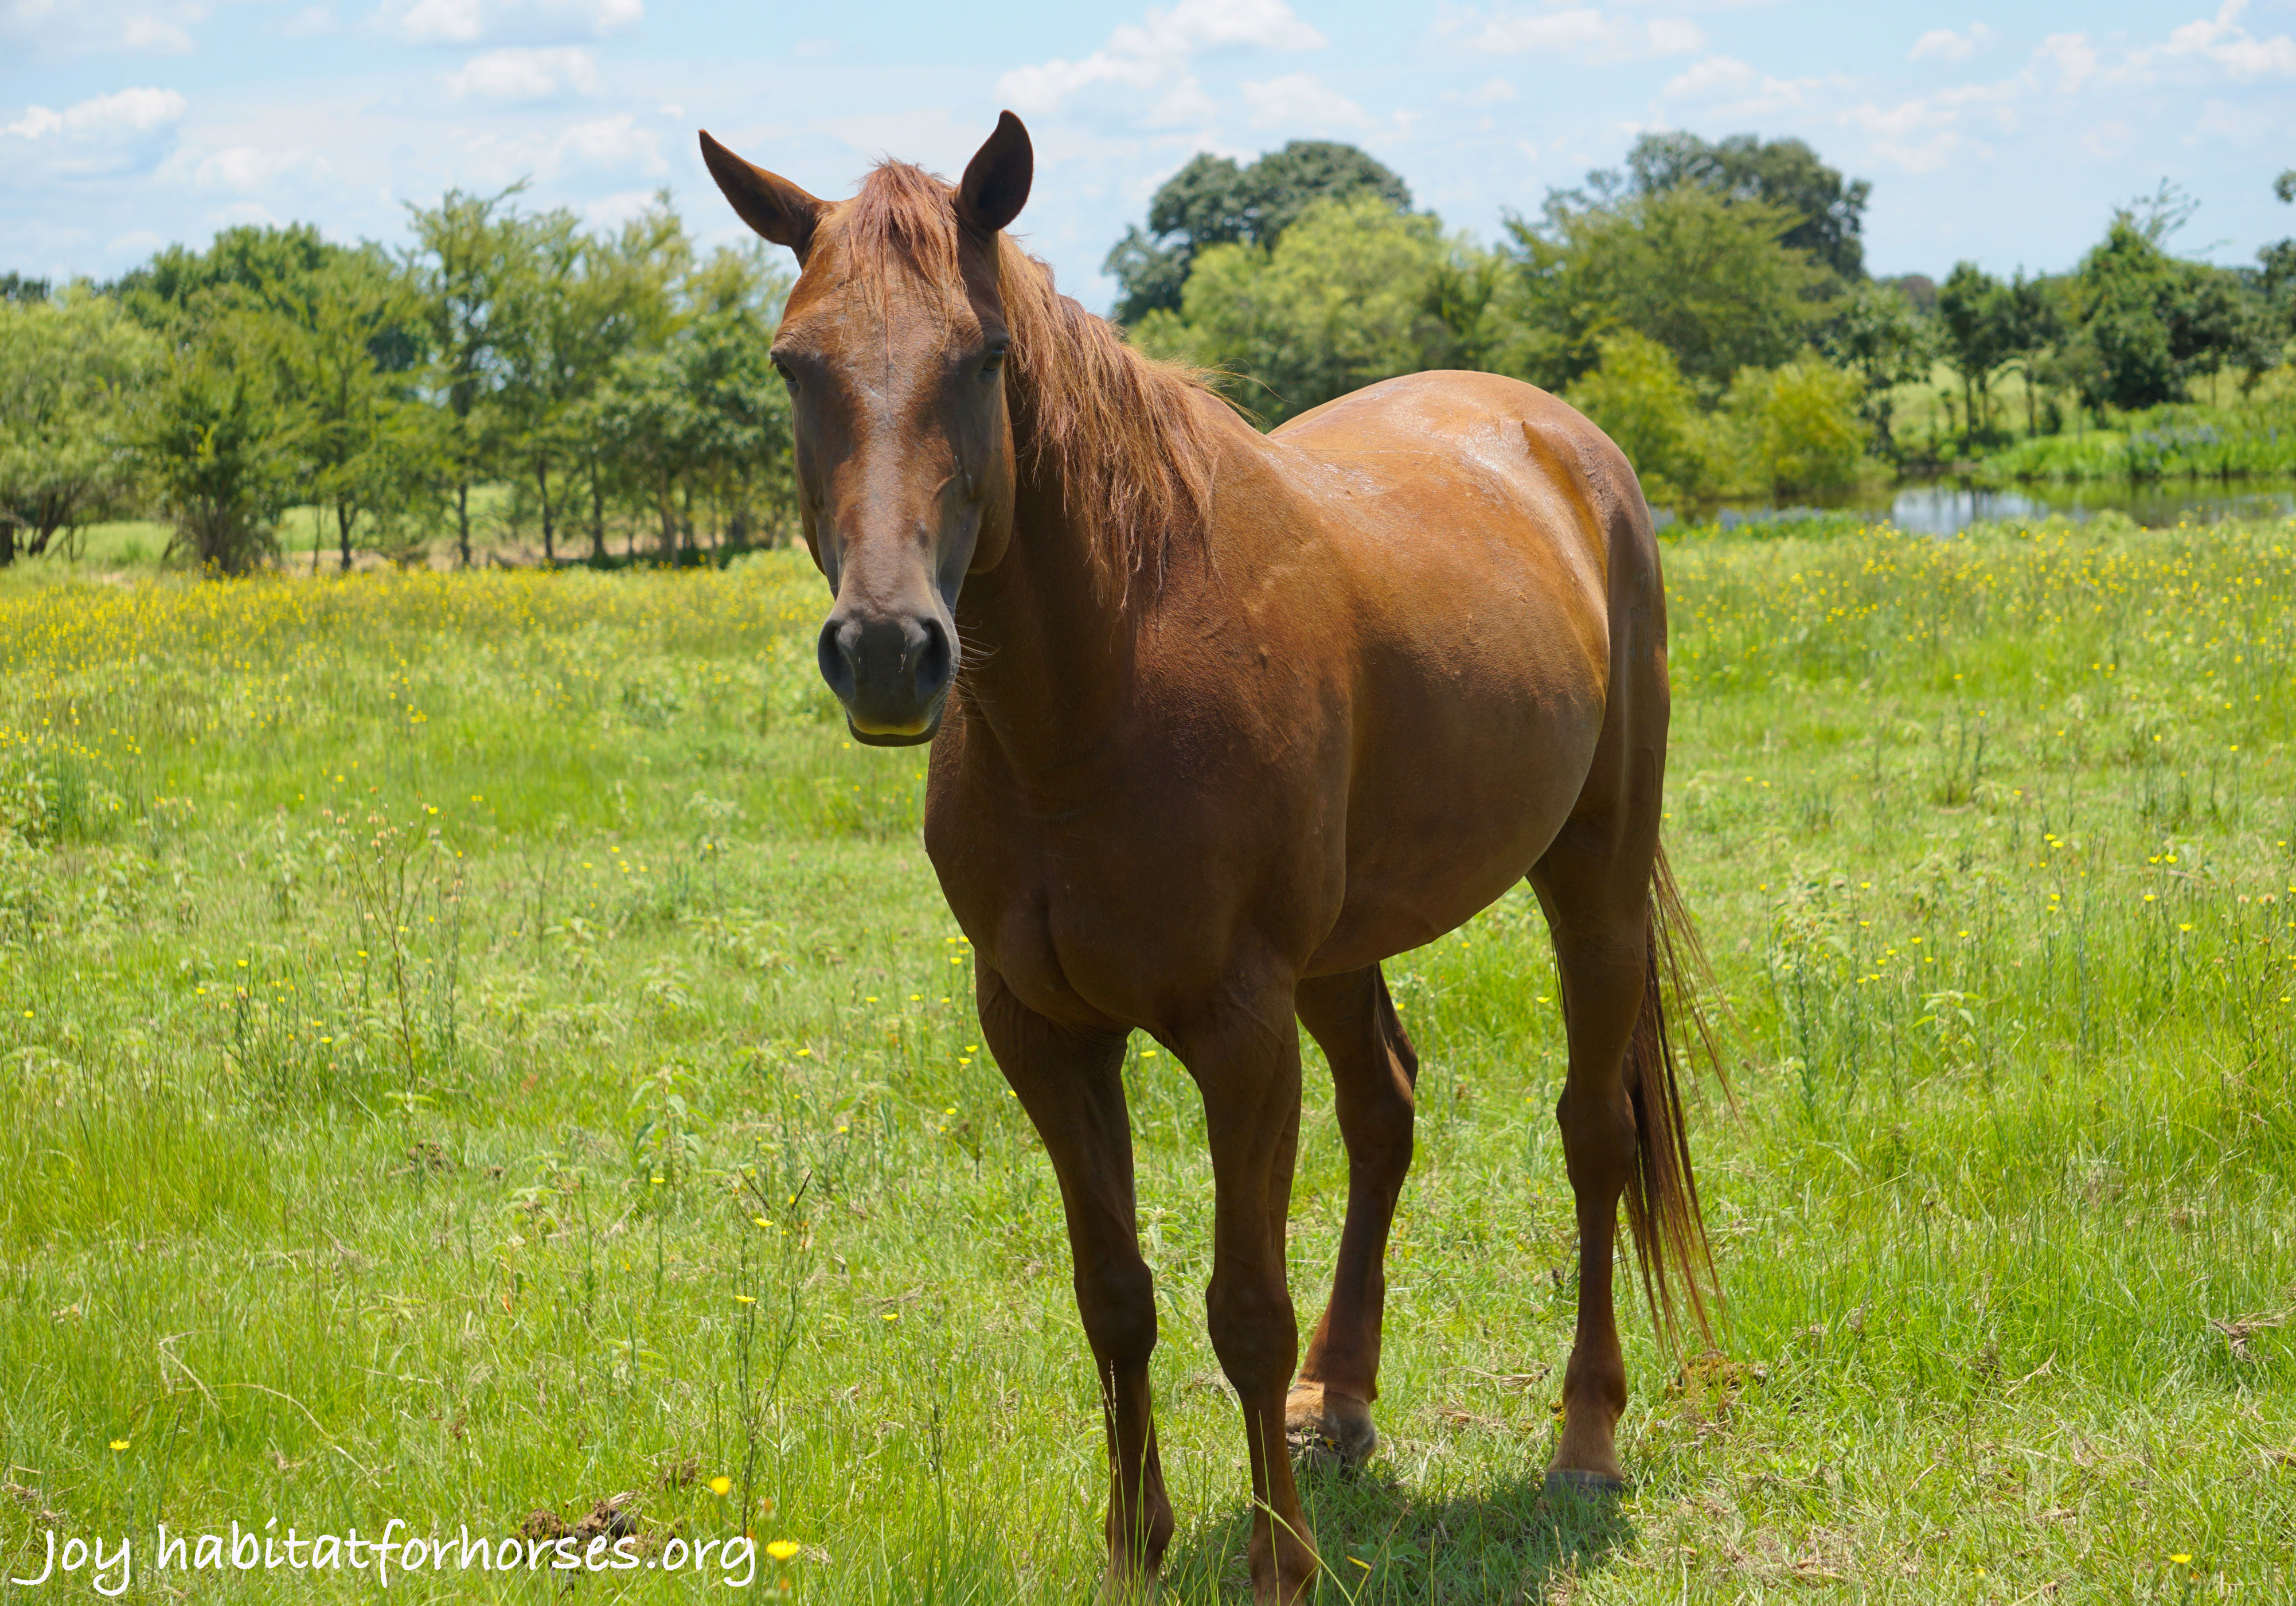 The domains focus on horses' nutrition, environment, health ...